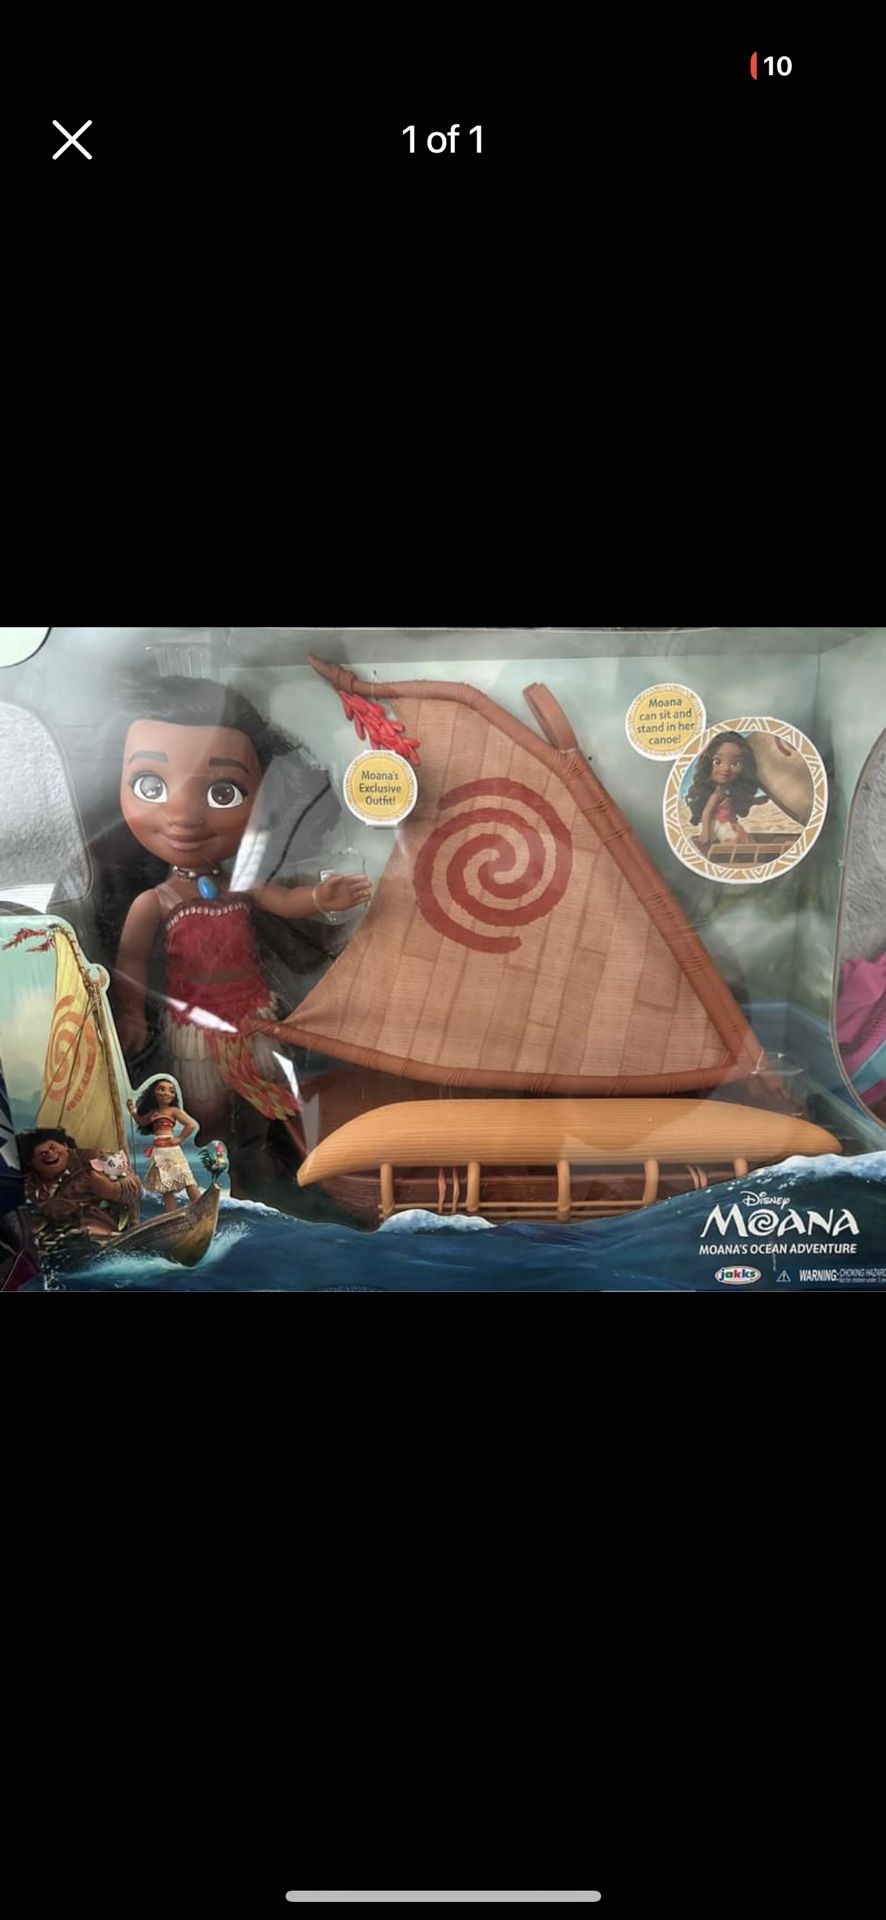 Moana, Spirit, Disney Version Of Shopkins - Brand New Toys In Package 